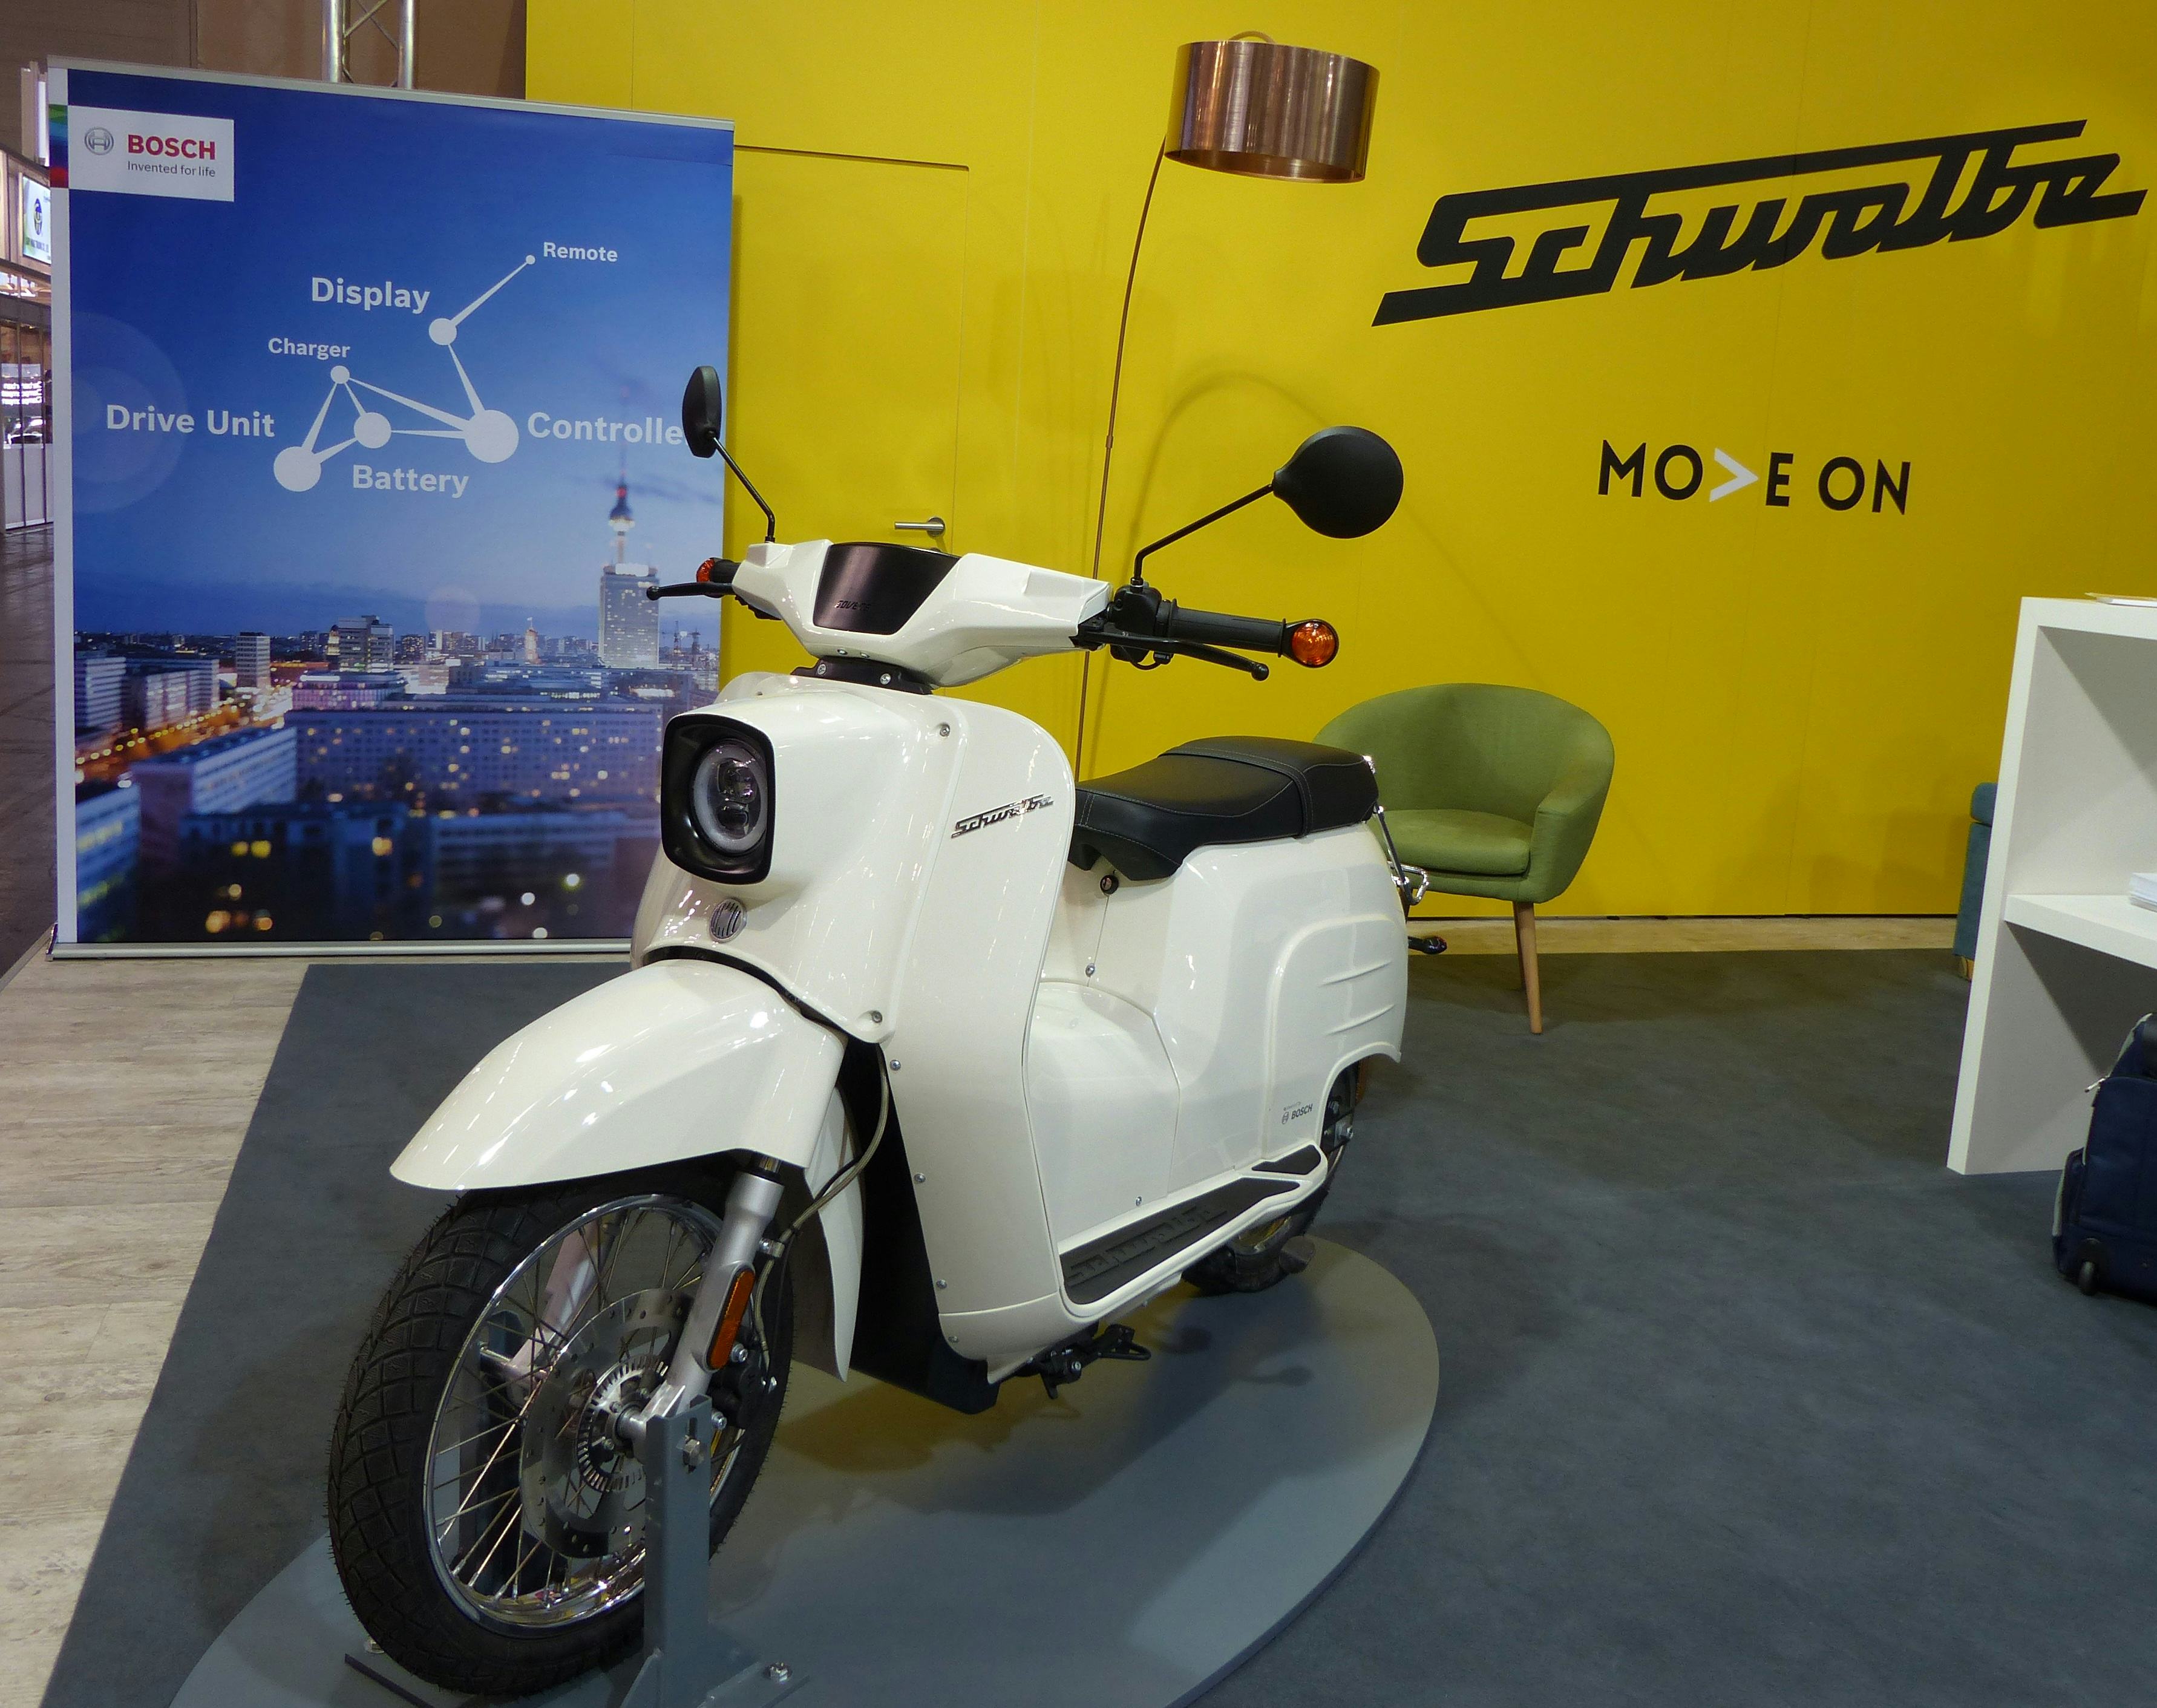 Bosch was Govecs technology partner to develop the electric drivetrain for e-scooter. – Photo Bike Europe